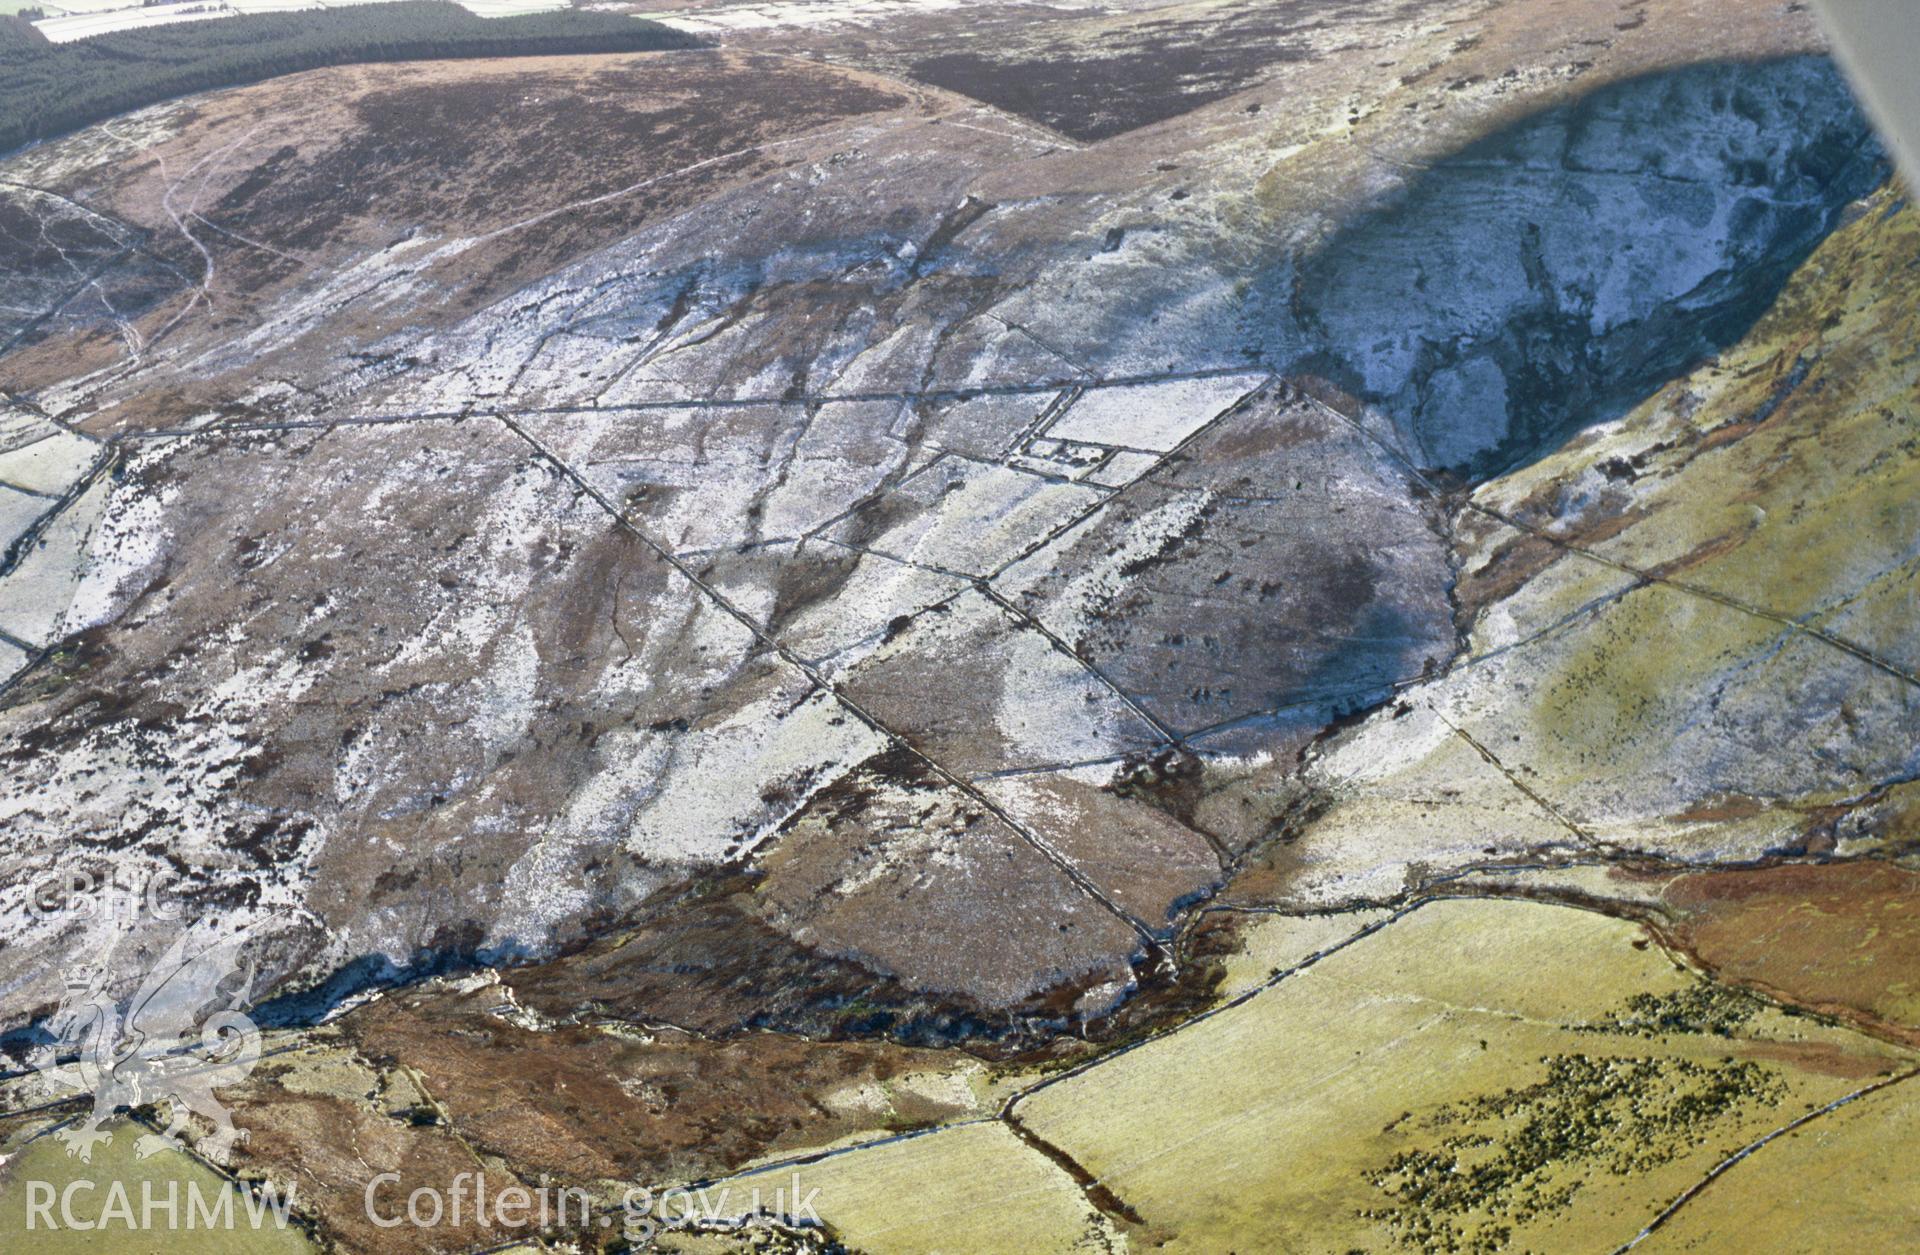 Slide of RCAHMW colour oblique aerial photograph of Waun Clyn Coch Farmstead, taken by Toby Driver, 2004.